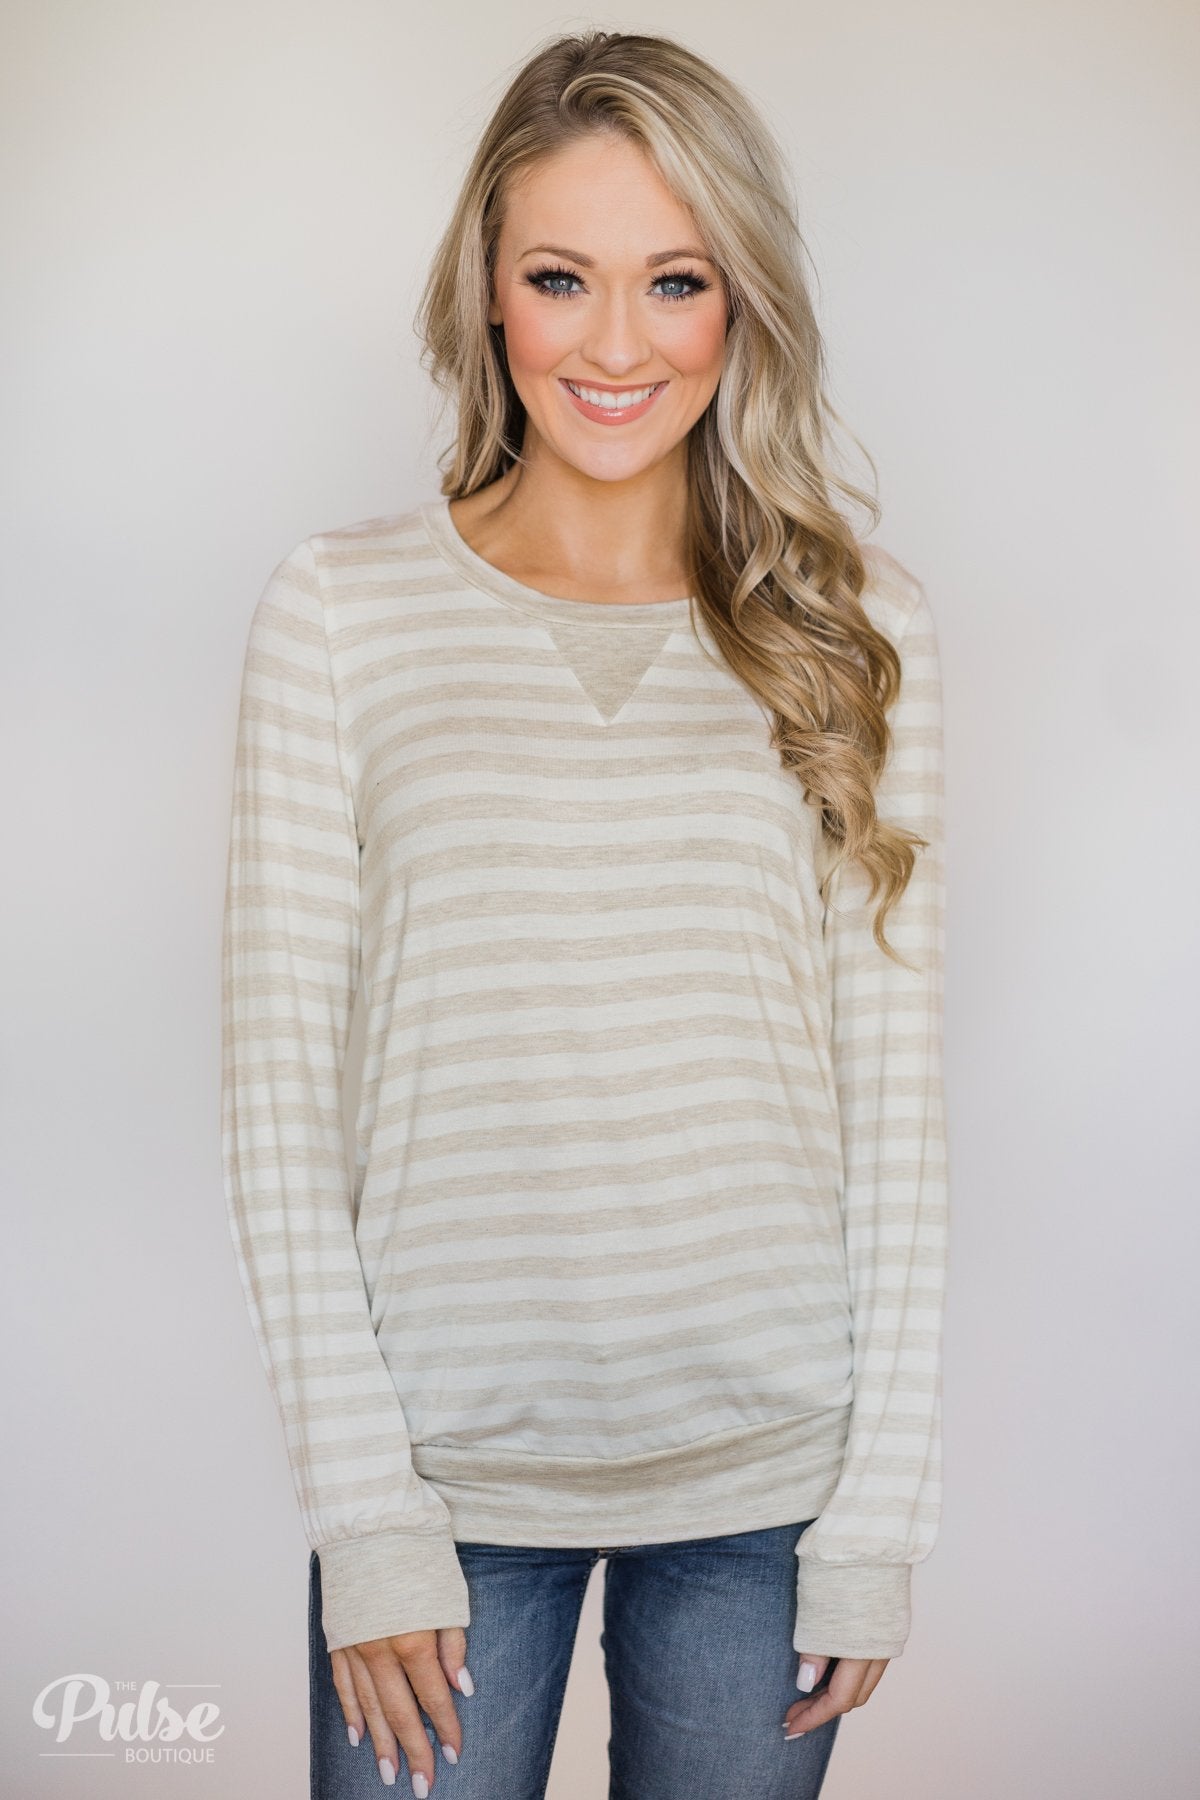 My Basic Necessity Striped Top- Oatmeal